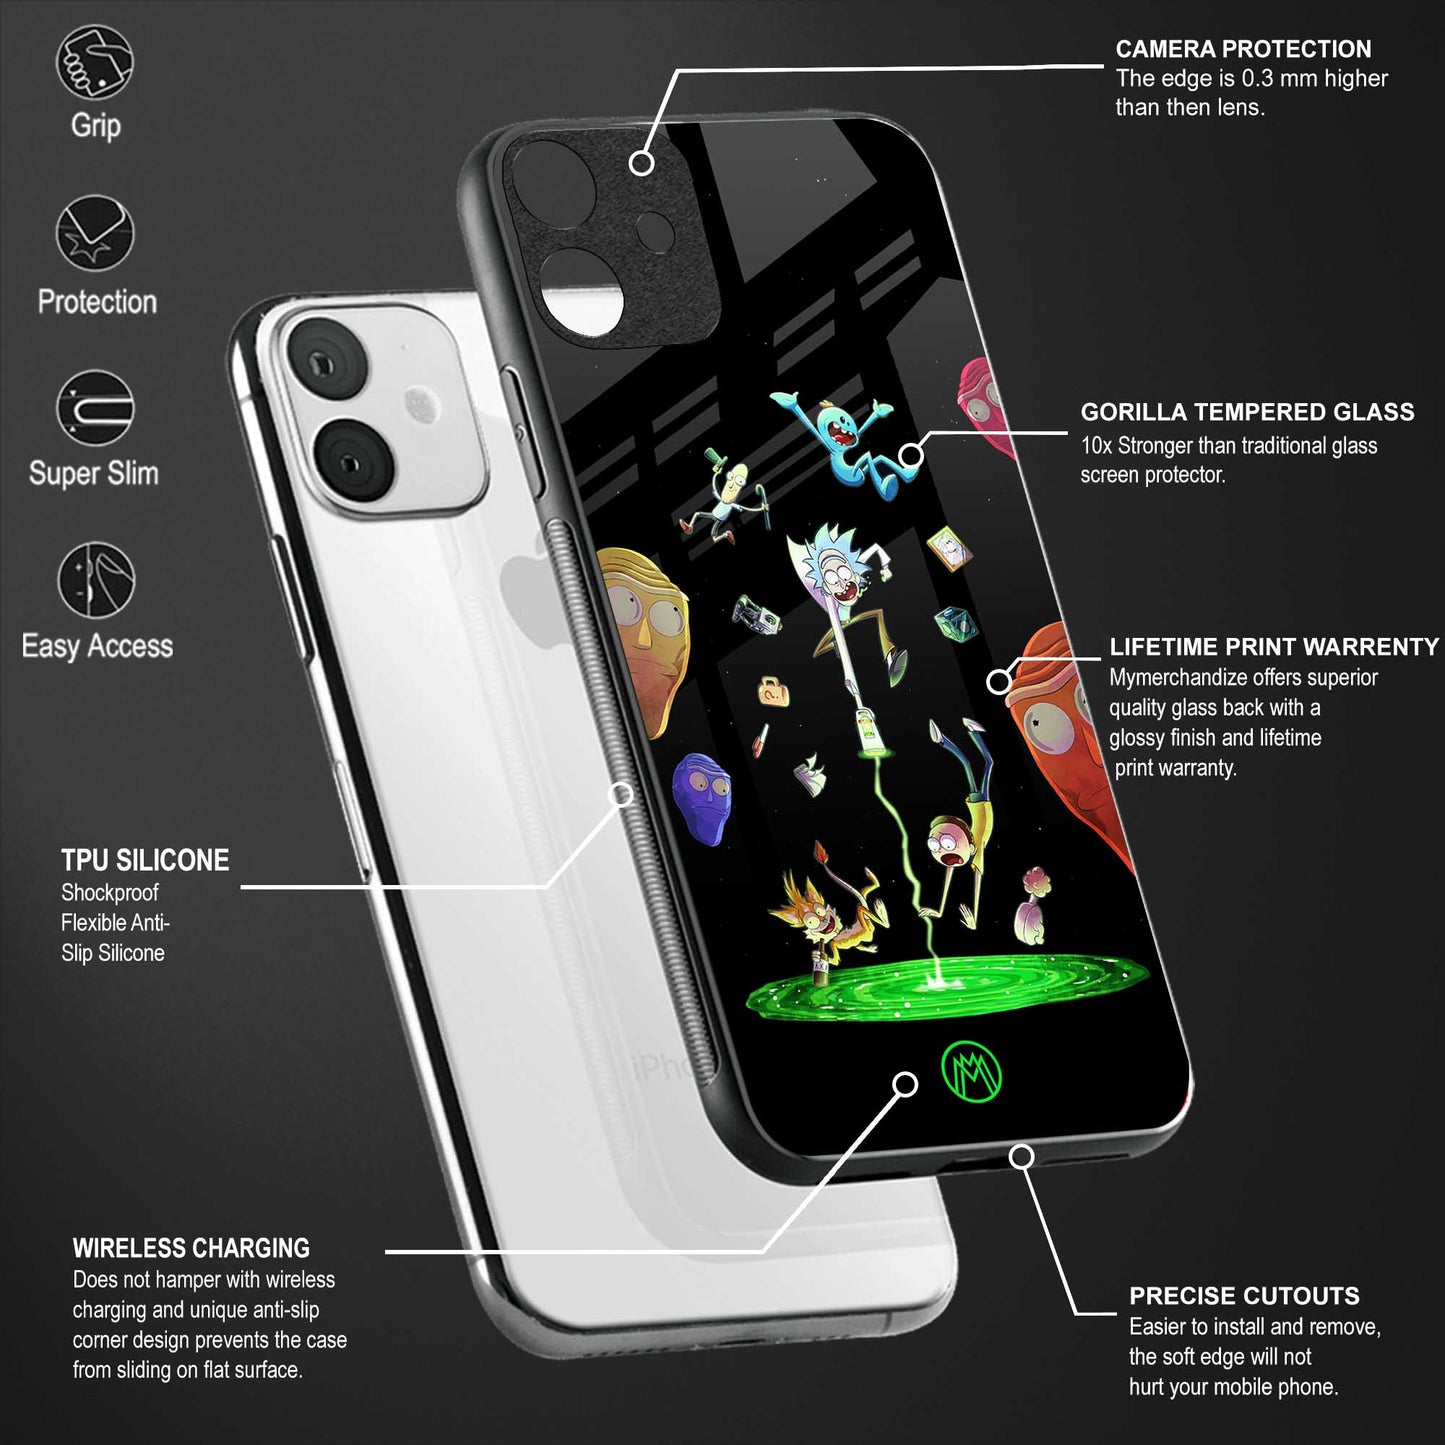 rick and morty amoled back phone cover | glass case for oppo f21 pro 4g